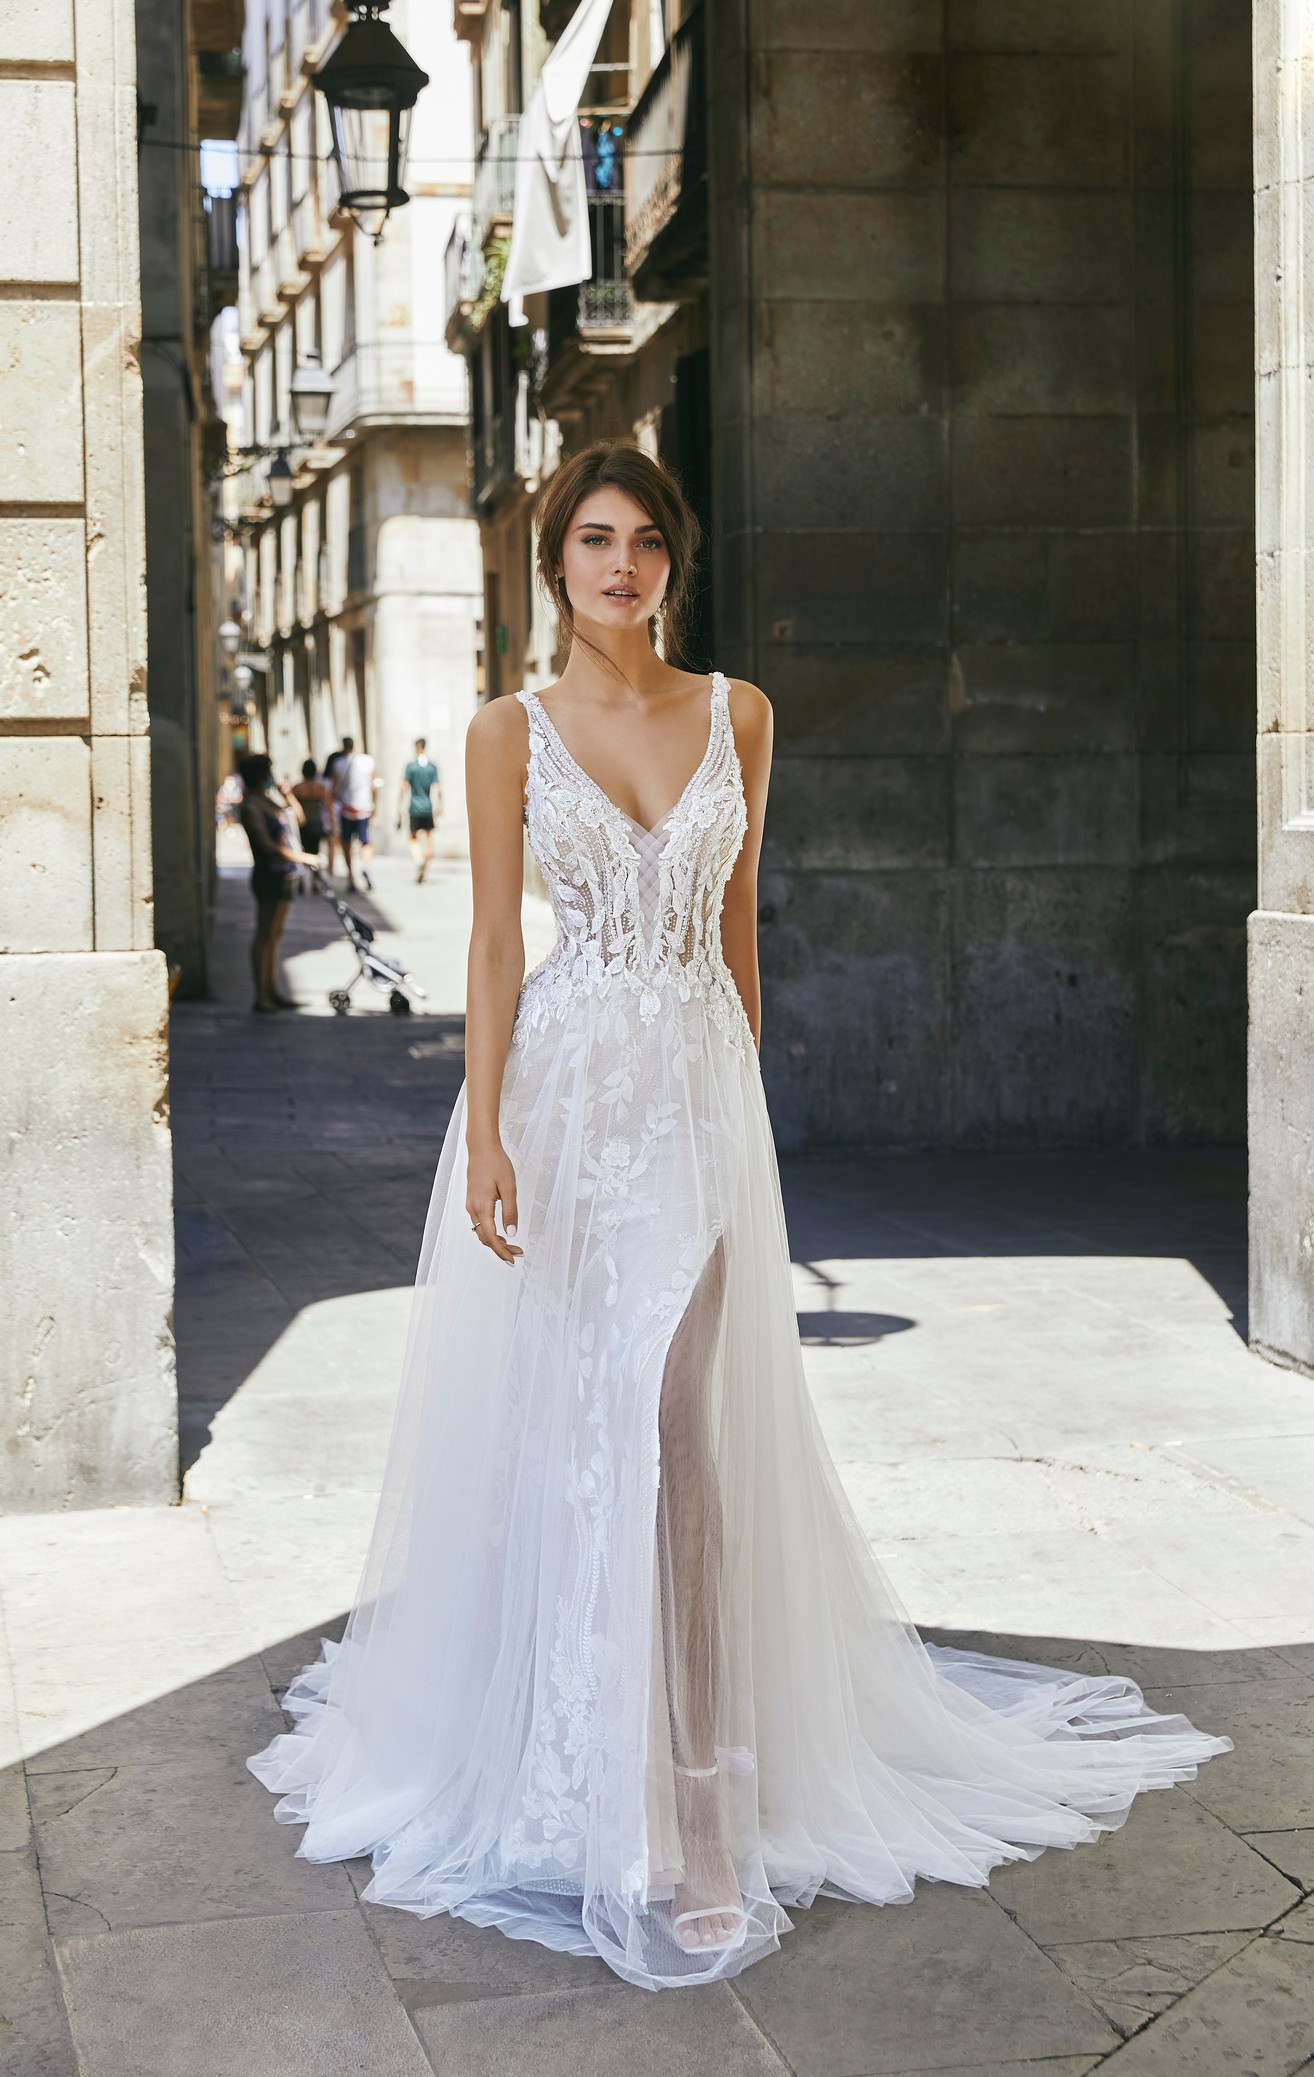 Brunette model stood in a sunny Spanish street in Ronald Joyce 69701, one of our sparkly A-line wedding dresses with a delicately beaded illusion bodice, floral lace appliqués, straps and a glitter tulle skirt with open leg detail.